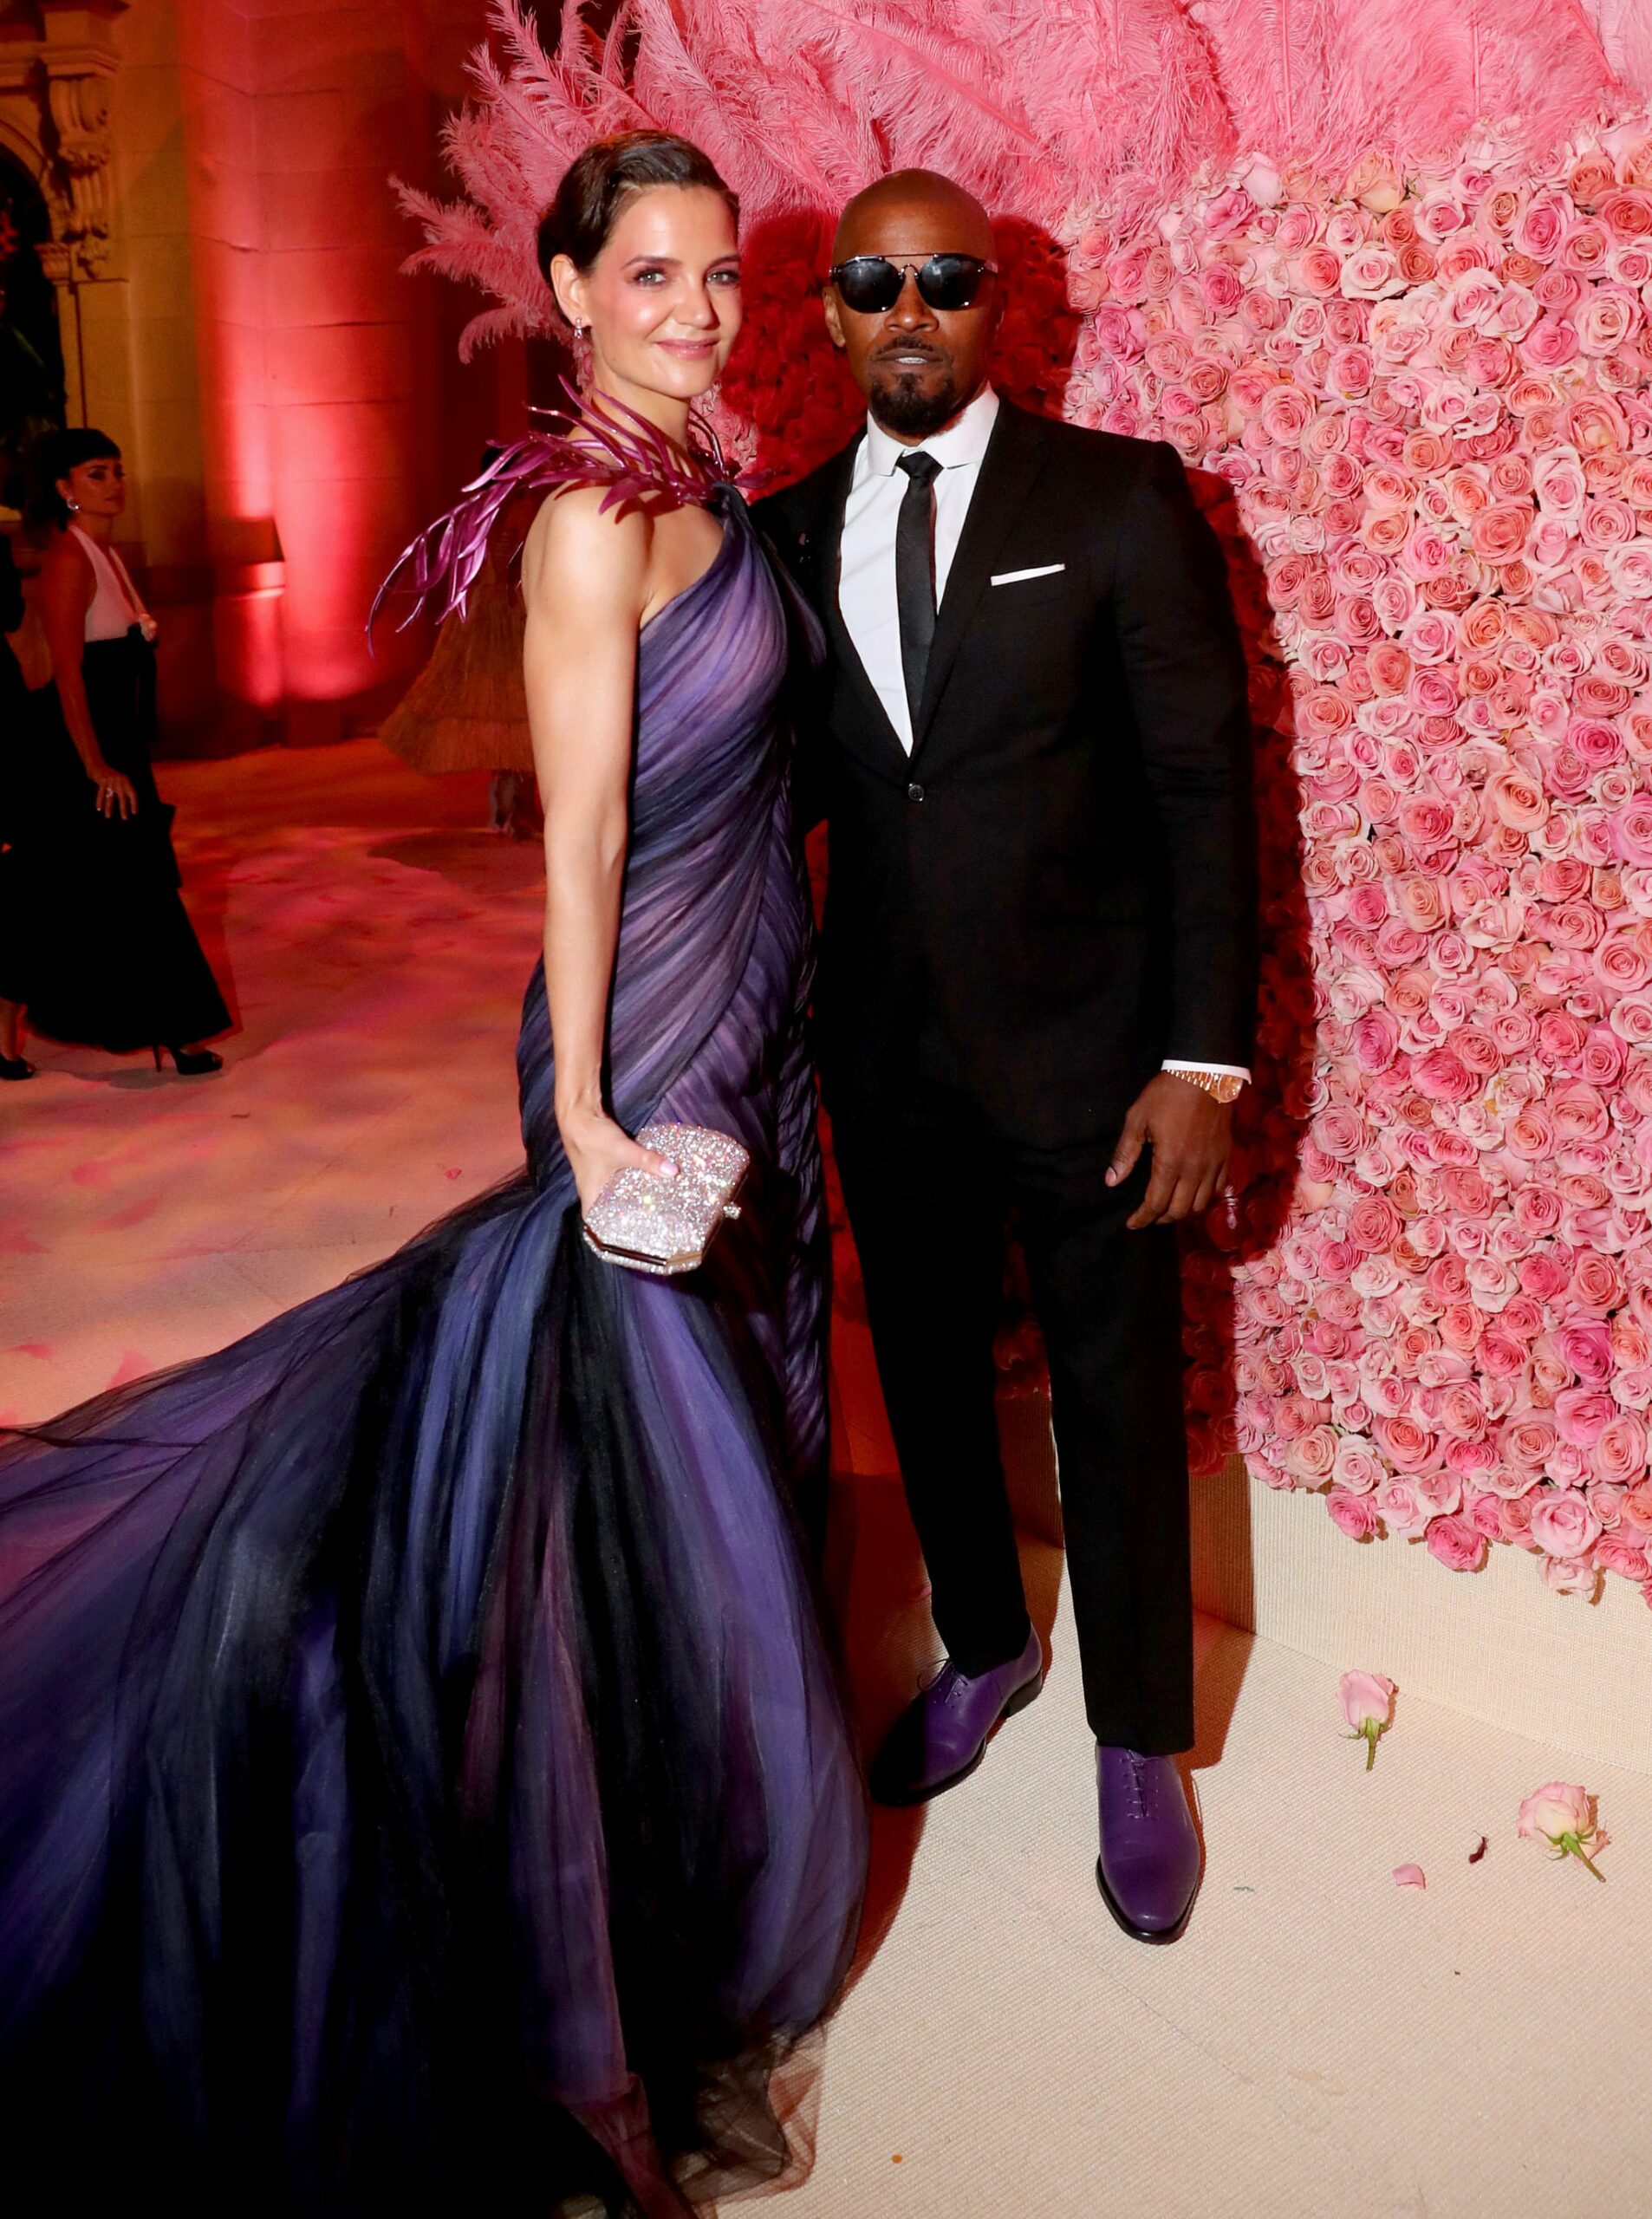 NEW YORK, NEW YORK - MAY 06: Katie Holmes and Jamie Foxx attend The 2019 Met Gala Celebrating Camp: Notes on Fashion at Metropolitan Museum of Art on May 06, 2019 in New York City. (Photo by Kevin Tachman/MG19/Getty Images for The Met Museum/Vogue)